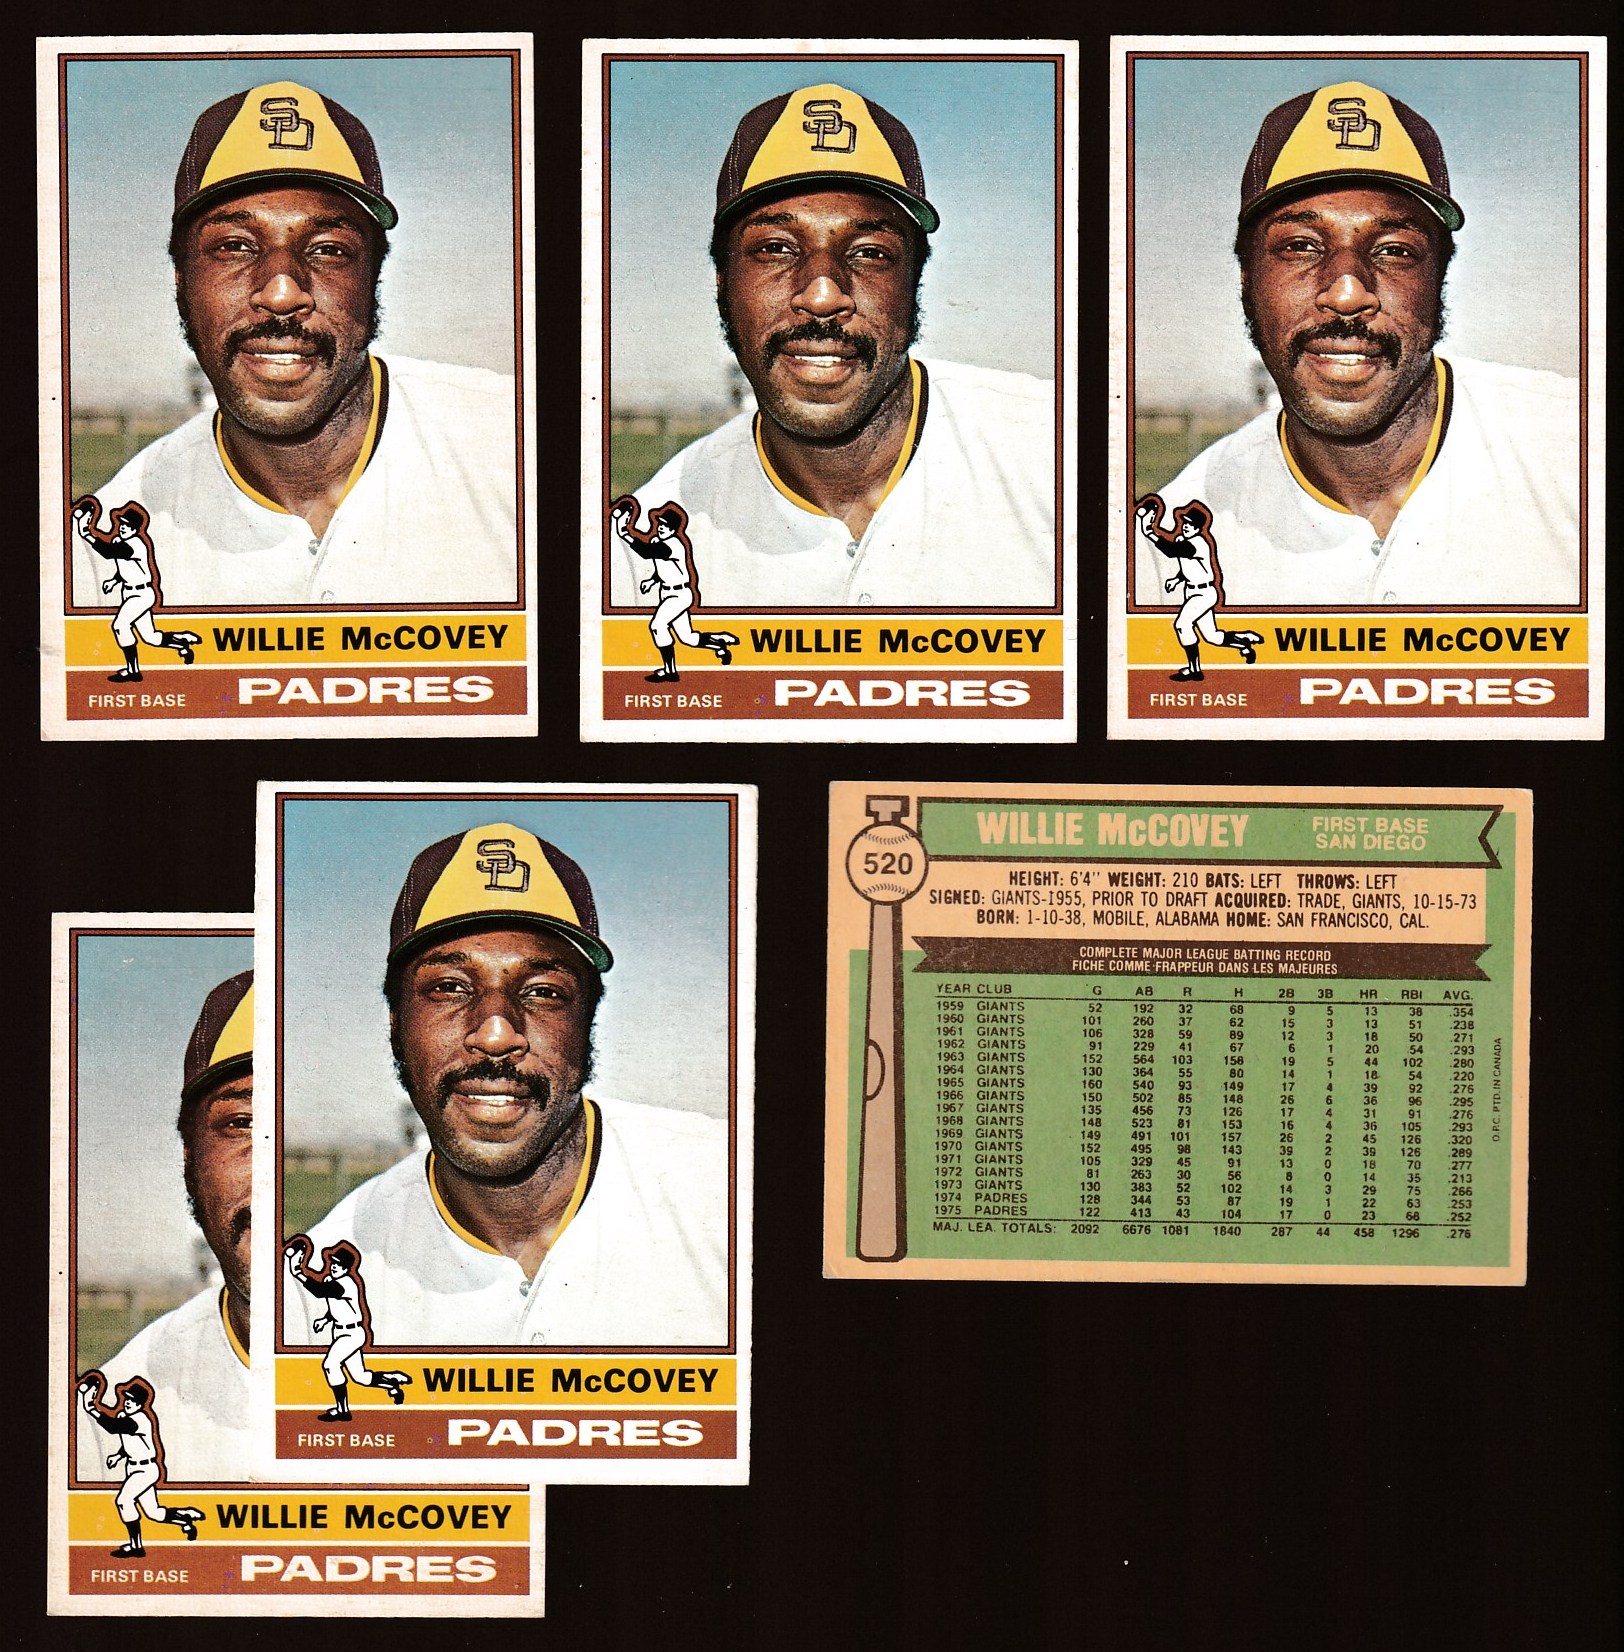 1976 O-Pee-Chee/OPC #520 Willie McCovey (Padres) Baseball cards value